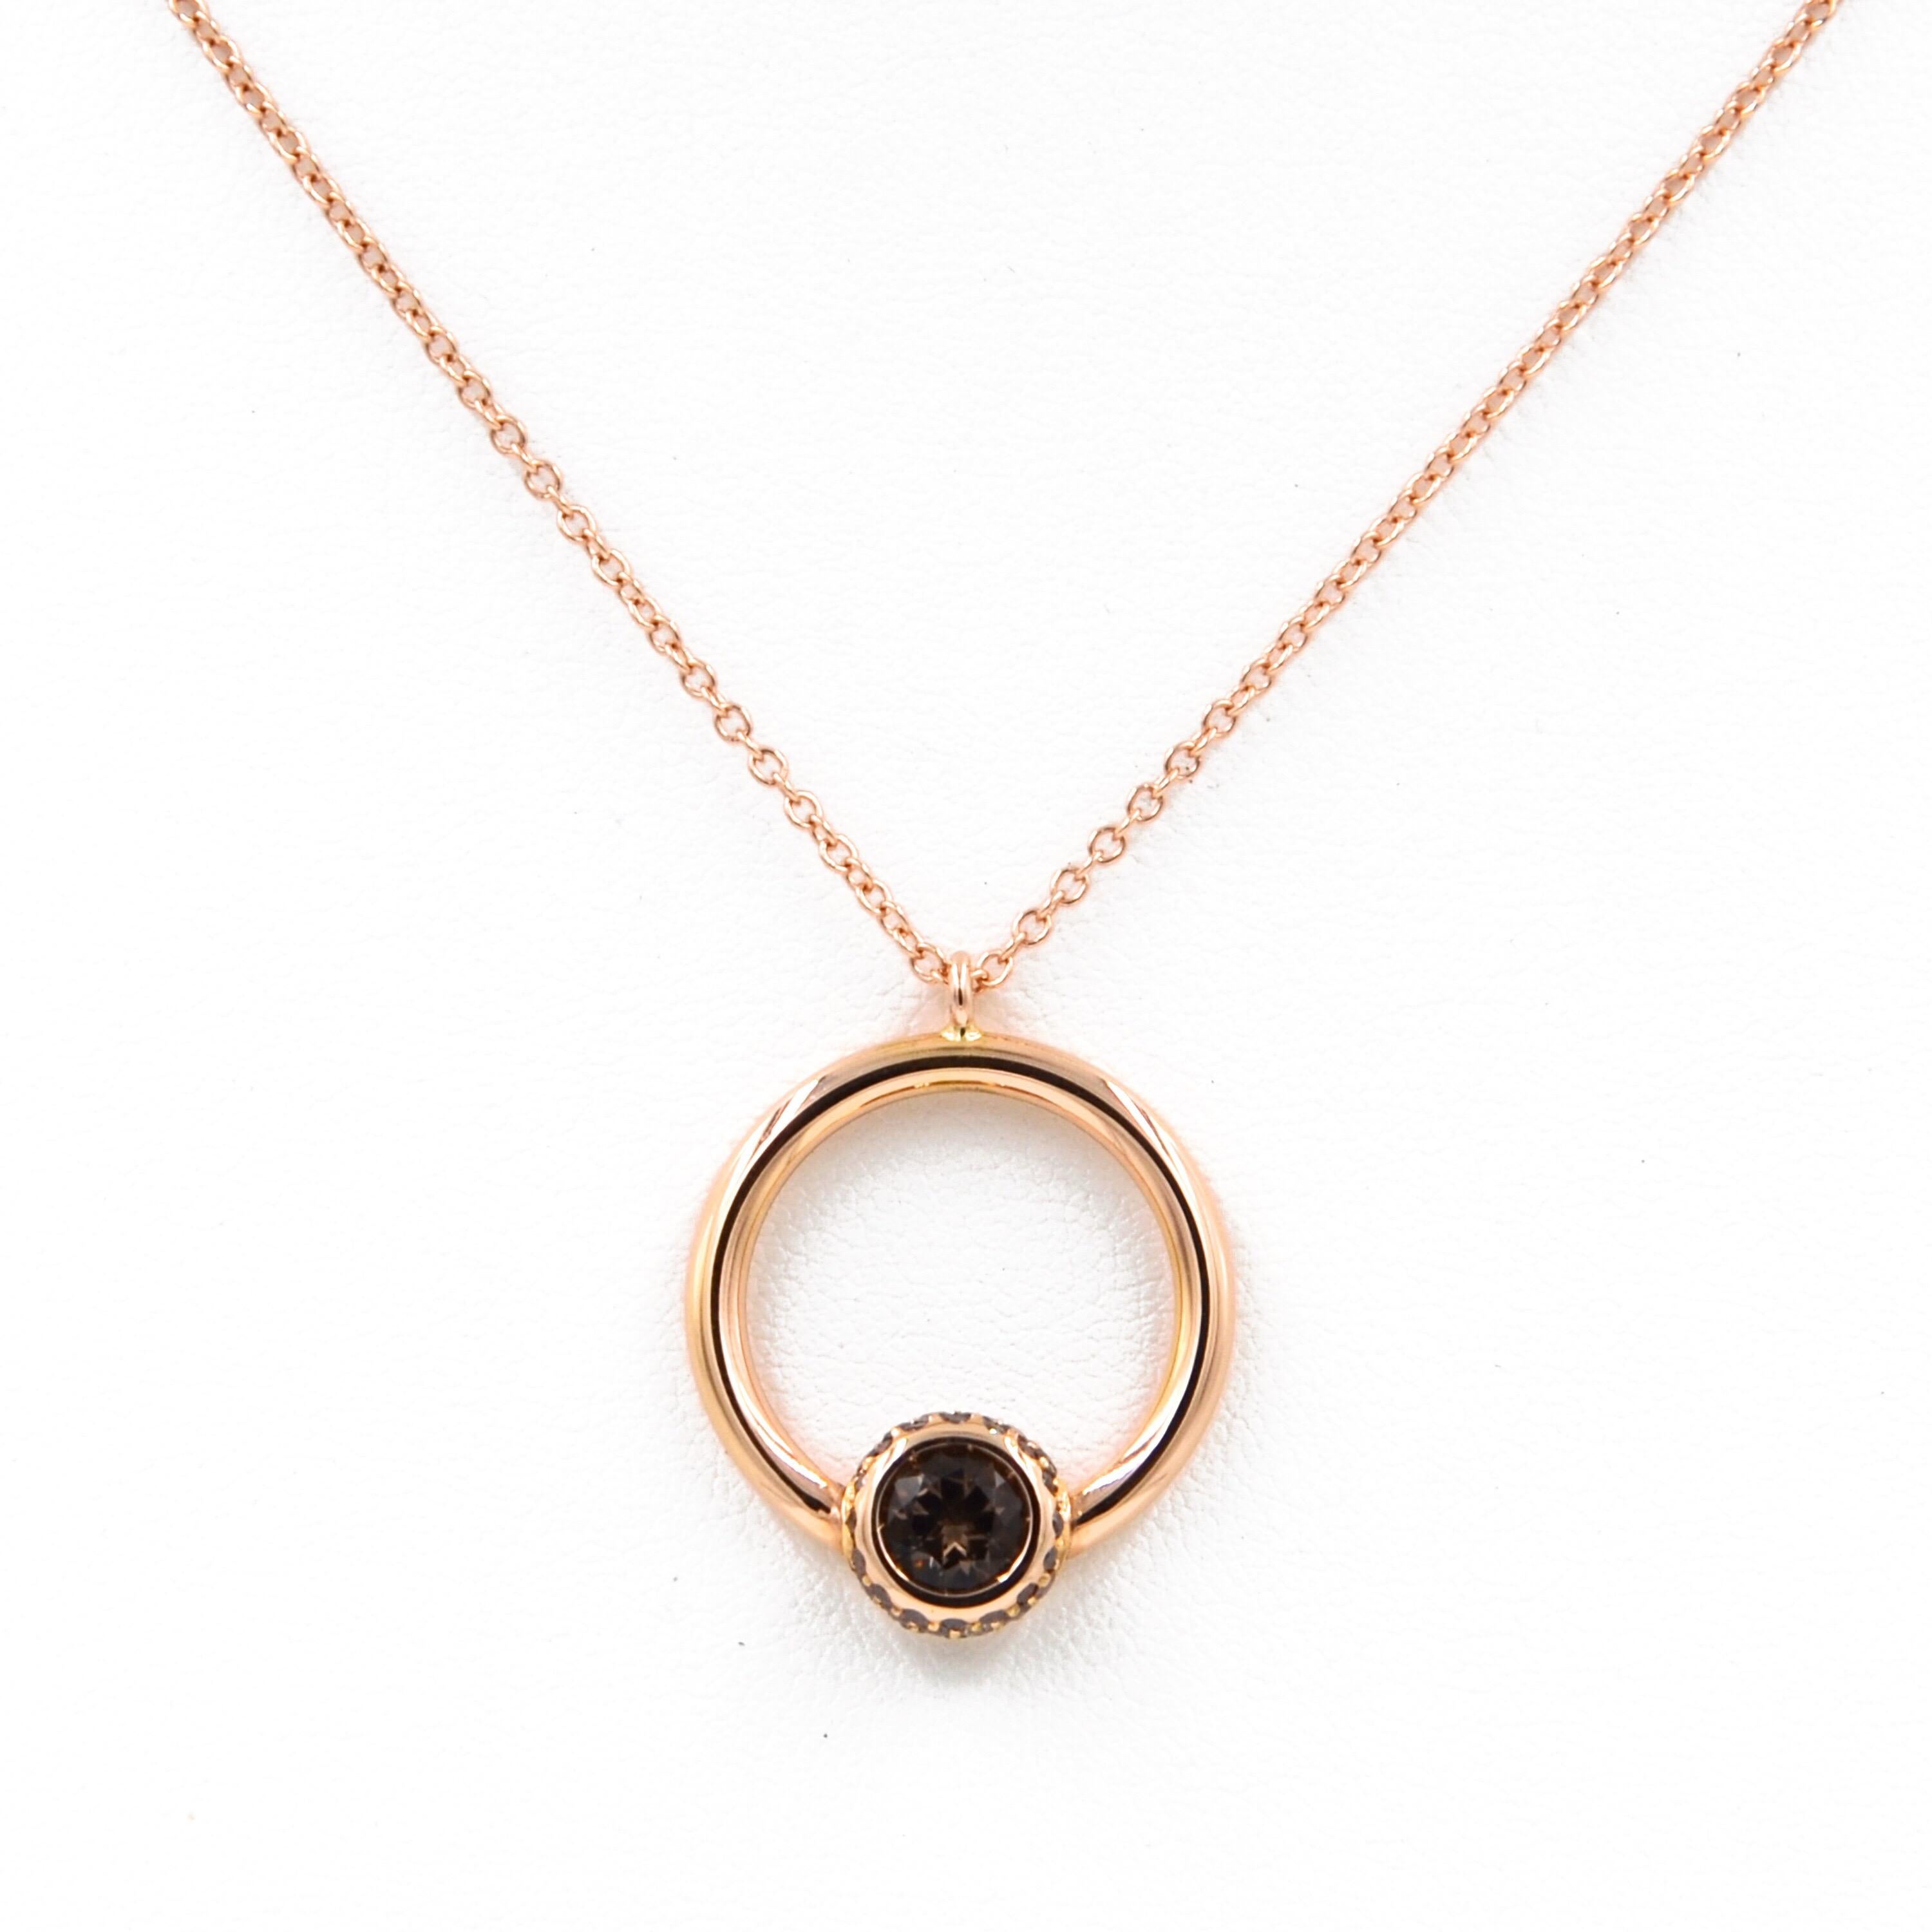 Rose gold Smokey Quartz and Brown Diamonds Pave' GARAVELLI Pendant with Chain 
Chain Length cm 50 with. a loop at cm45 
Circle diameter mm 20
18kt ROSE GOLD gr : 6,05
BROWN DIAMONDS ct : 0,43
SMOKEY QUARTZ stone diameter mm 6  ct : 0,67